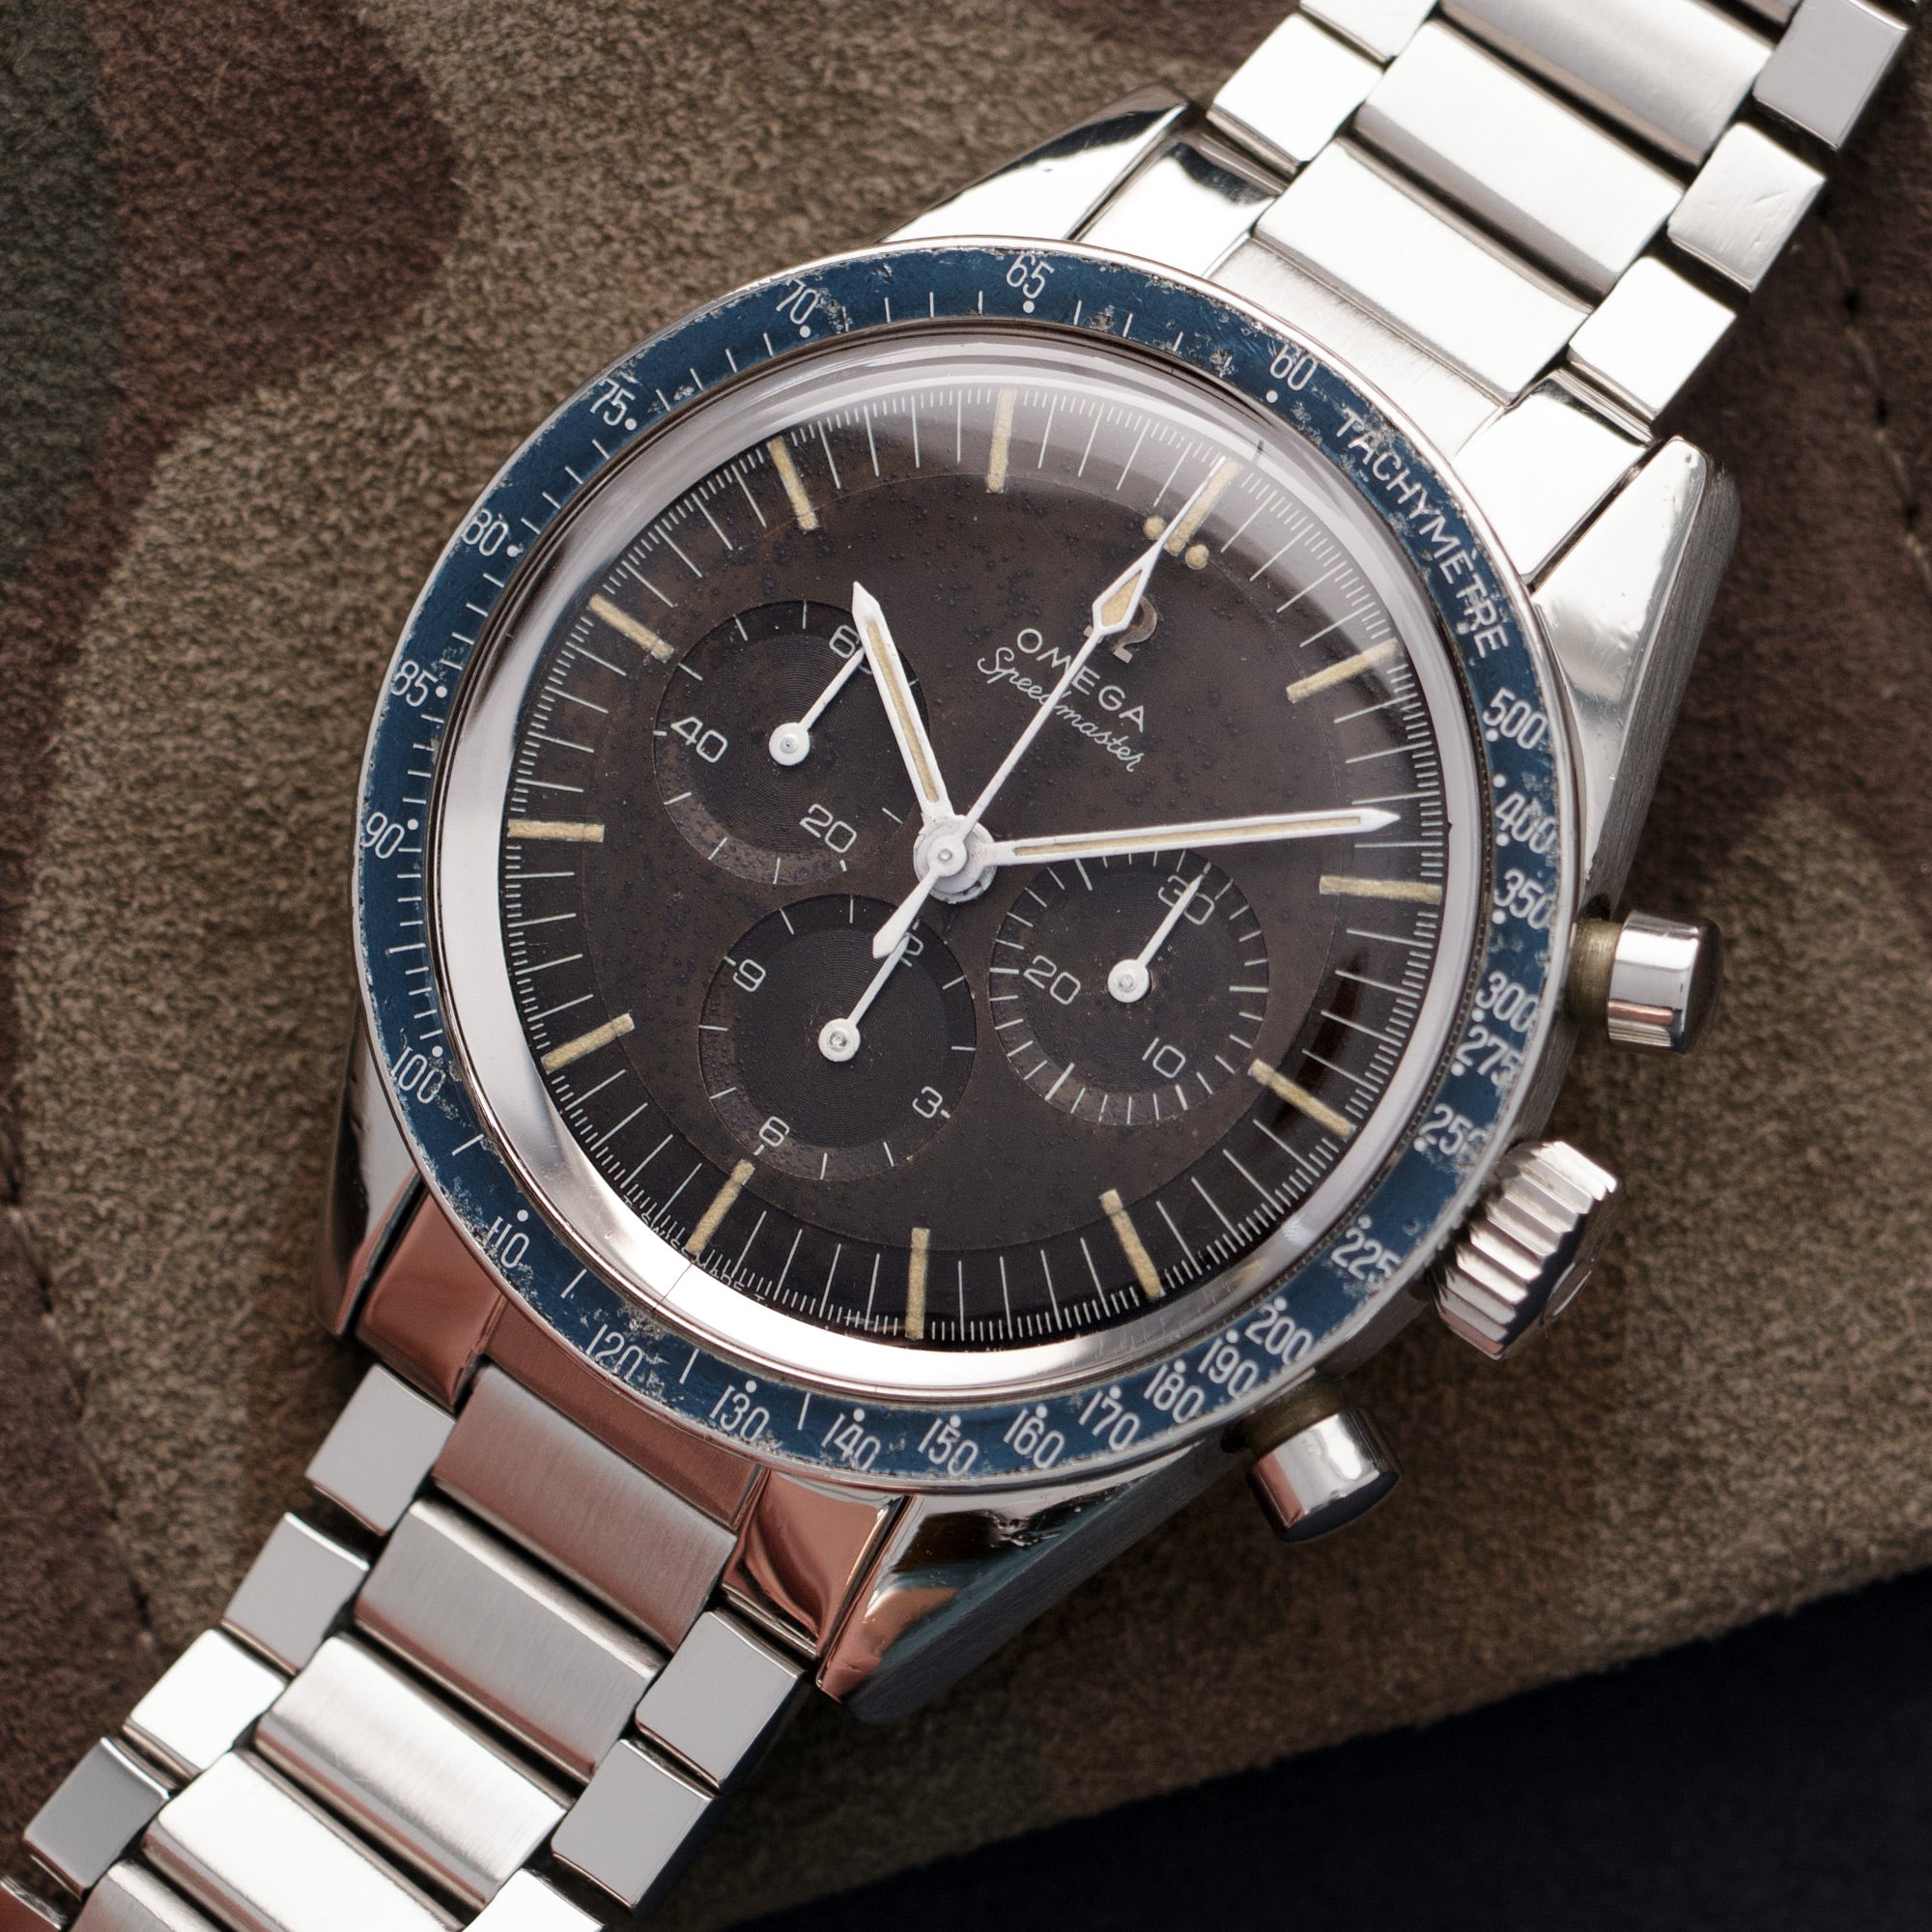 Omega - Omega Speedmaster Ed White Tropical Brown Dial Watch Ref. 105.003 - The Keystone Watches